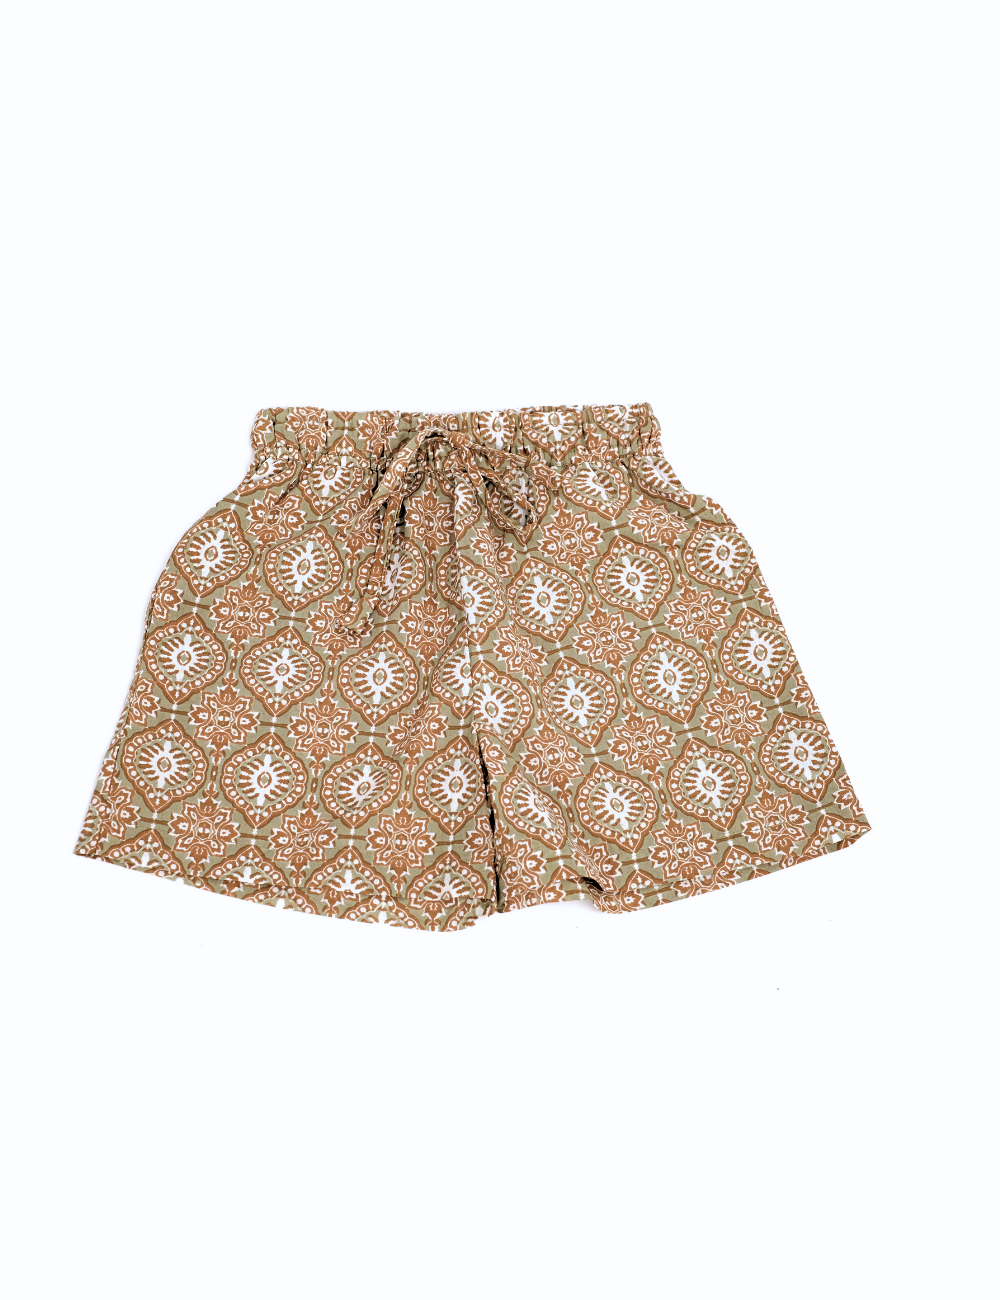 product photo of indian block printed shorts in retro funk print